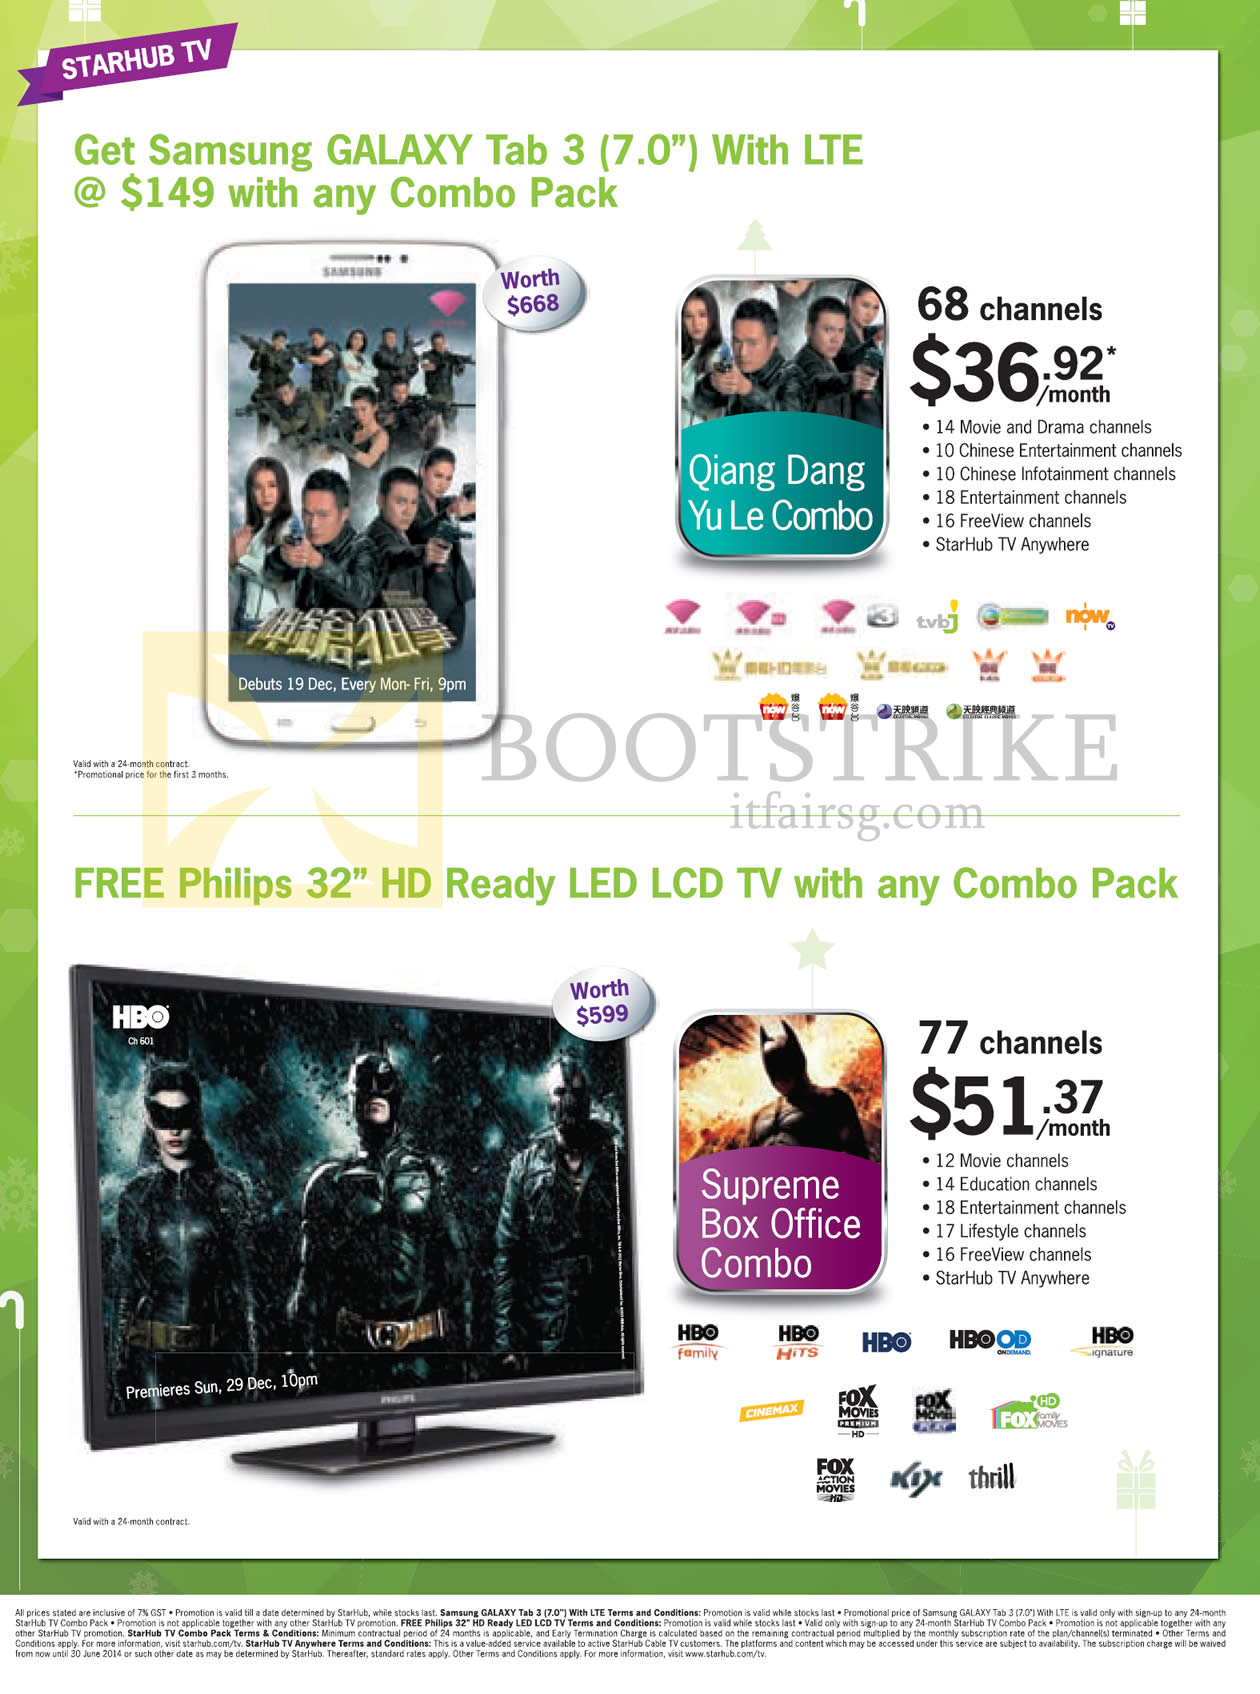 SITEX 2013 price list image brochure of Starhub Cable TV Free Philips 32 TV, Samsung Galaxy Tab 3 7.0, Qiang Dang Yu Le Combo Pack, Supreme Box Office Combo